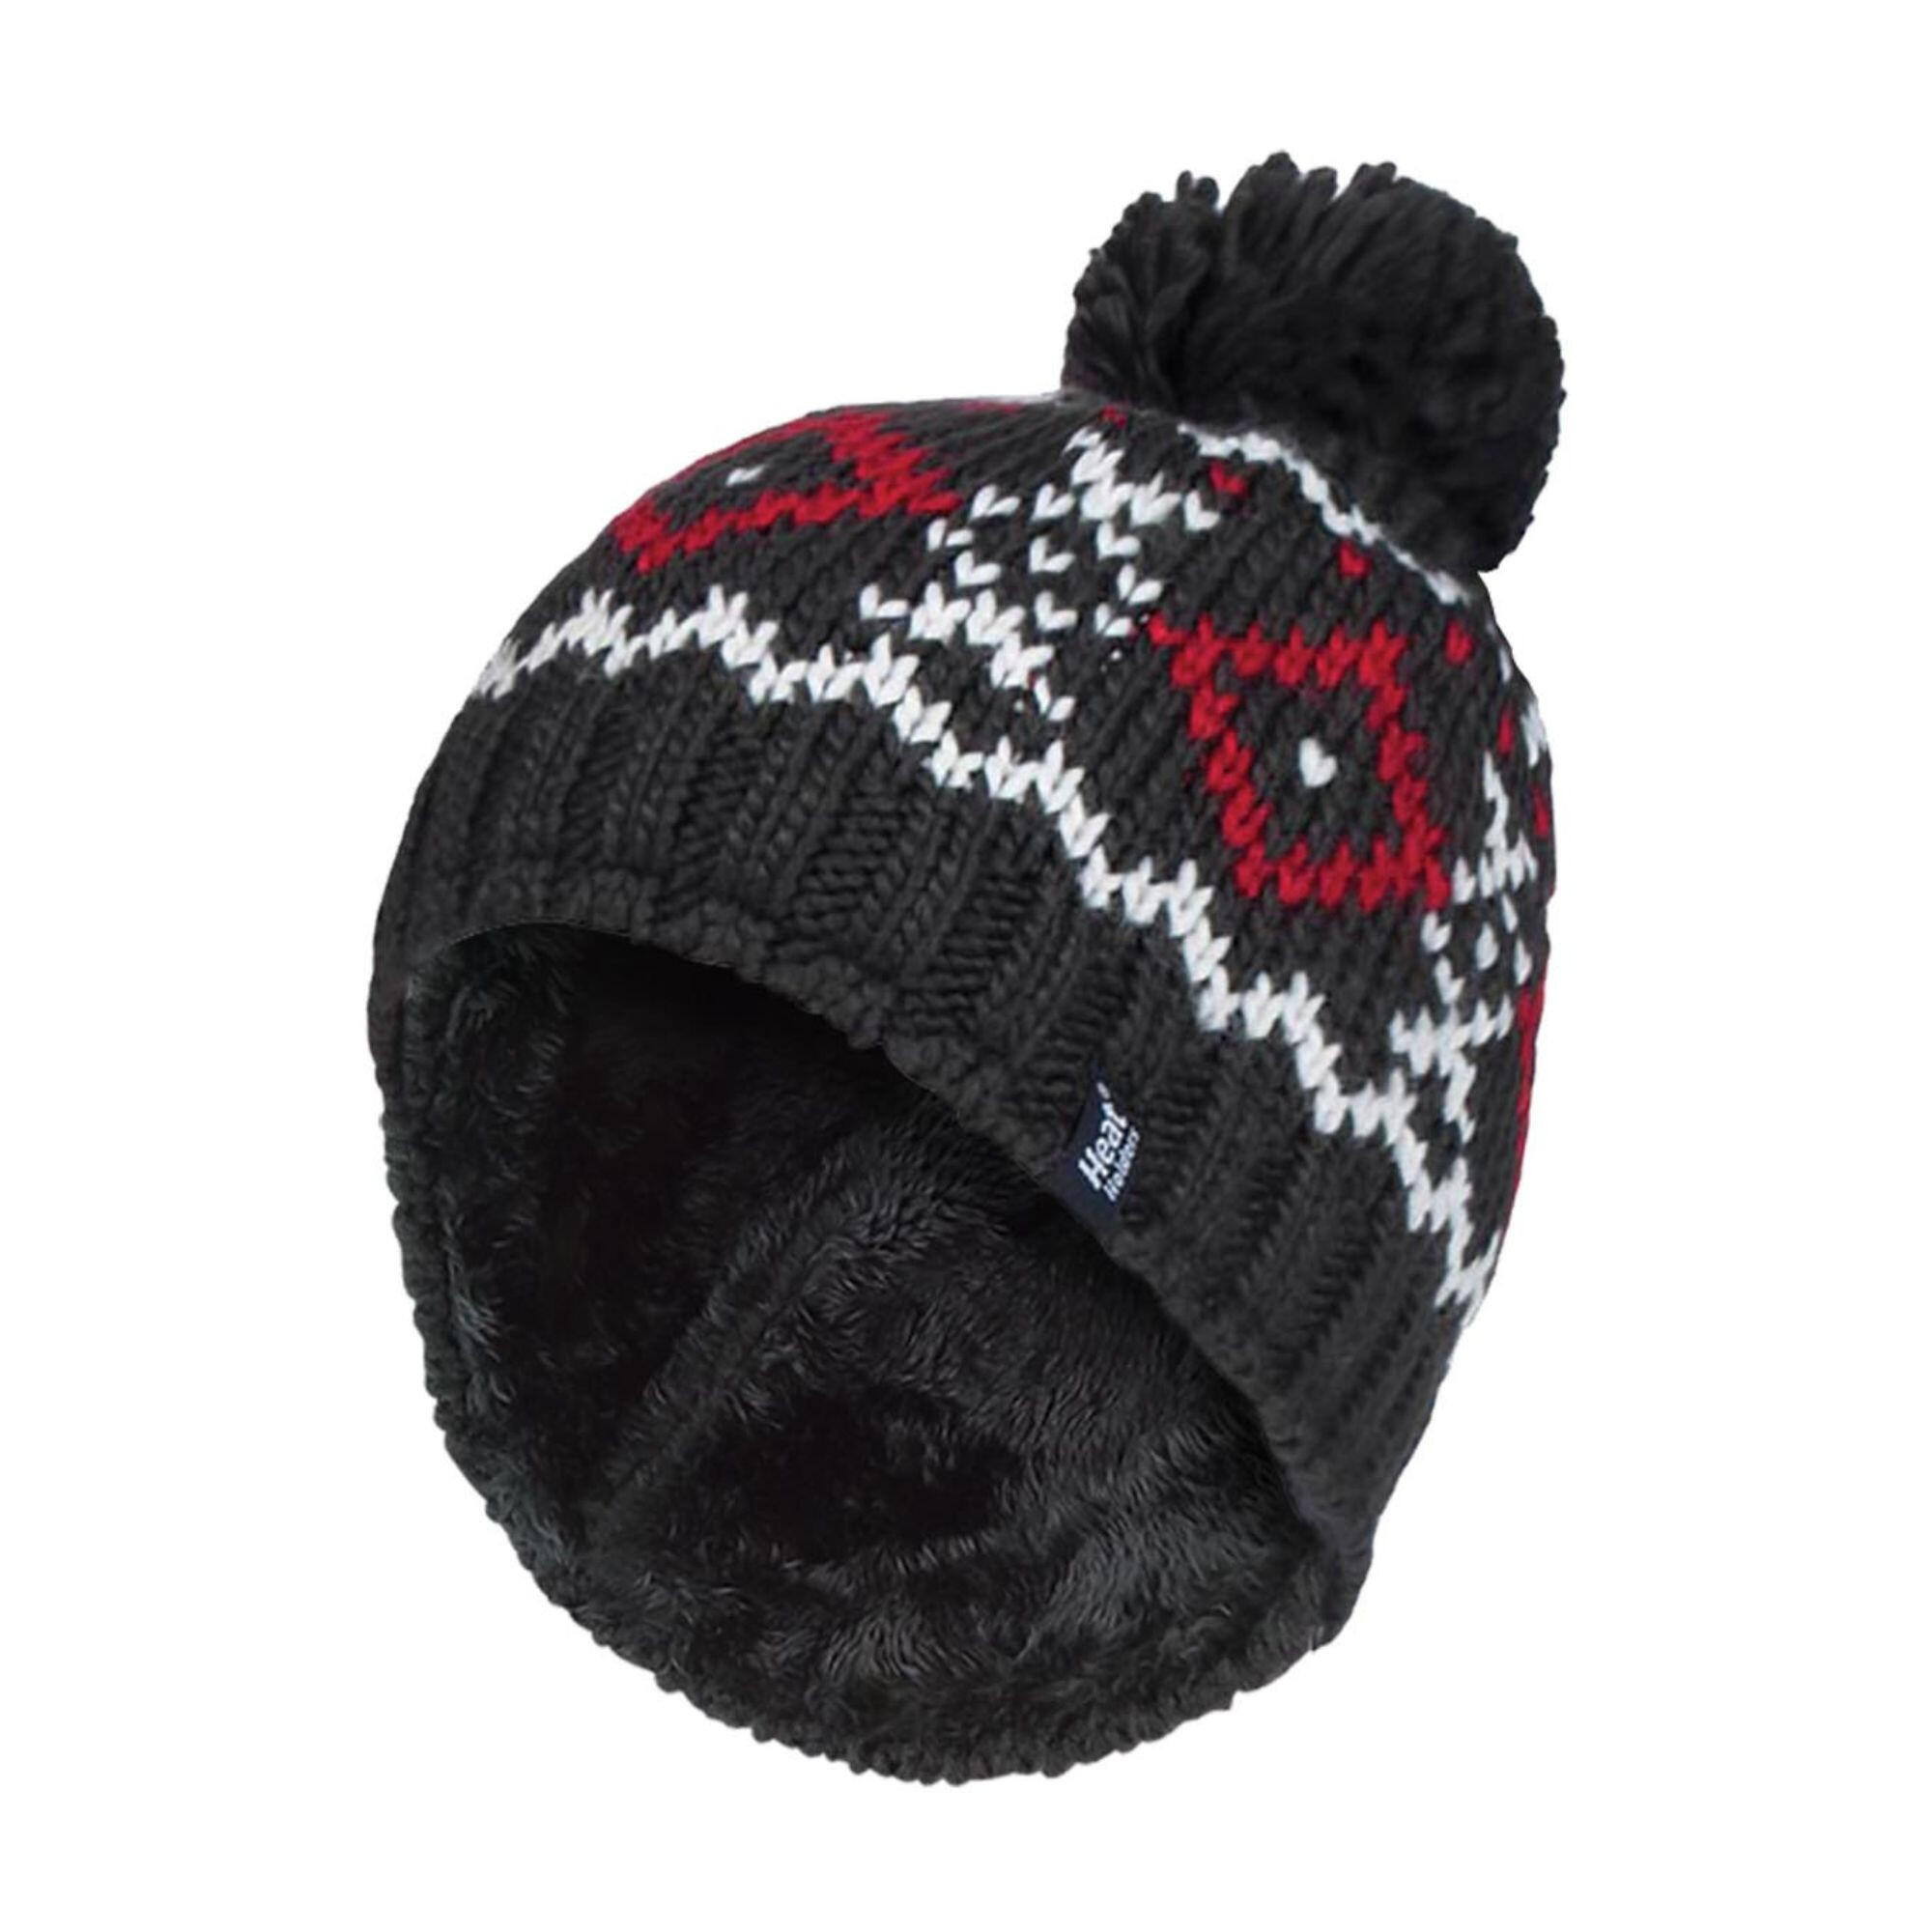 HEAT HOLDERS Mens Fleece Lined Thermal Winter Warm Beanie Bobble Hat with Pom Pom